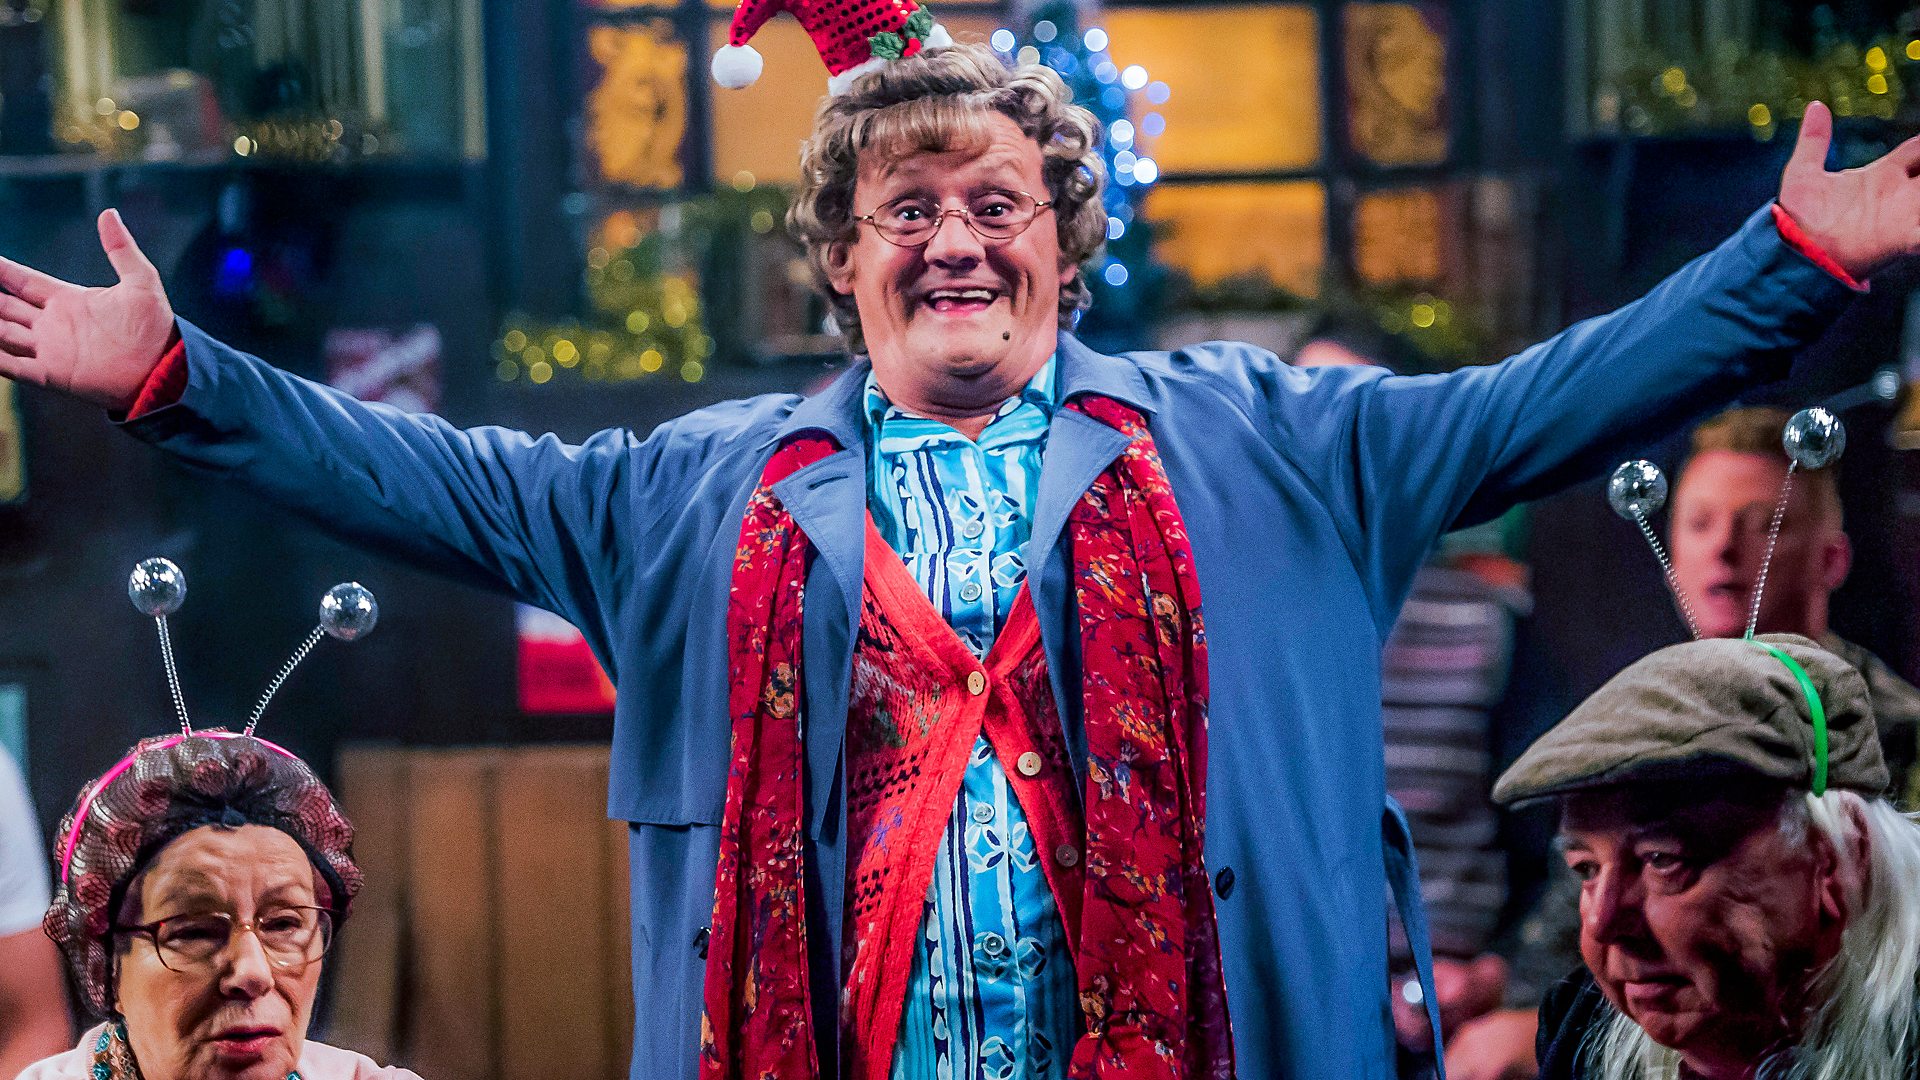 Bbc Iplayer Mrs Browns Boys Christmas Specials 2016 1 Mammys Forest 2676